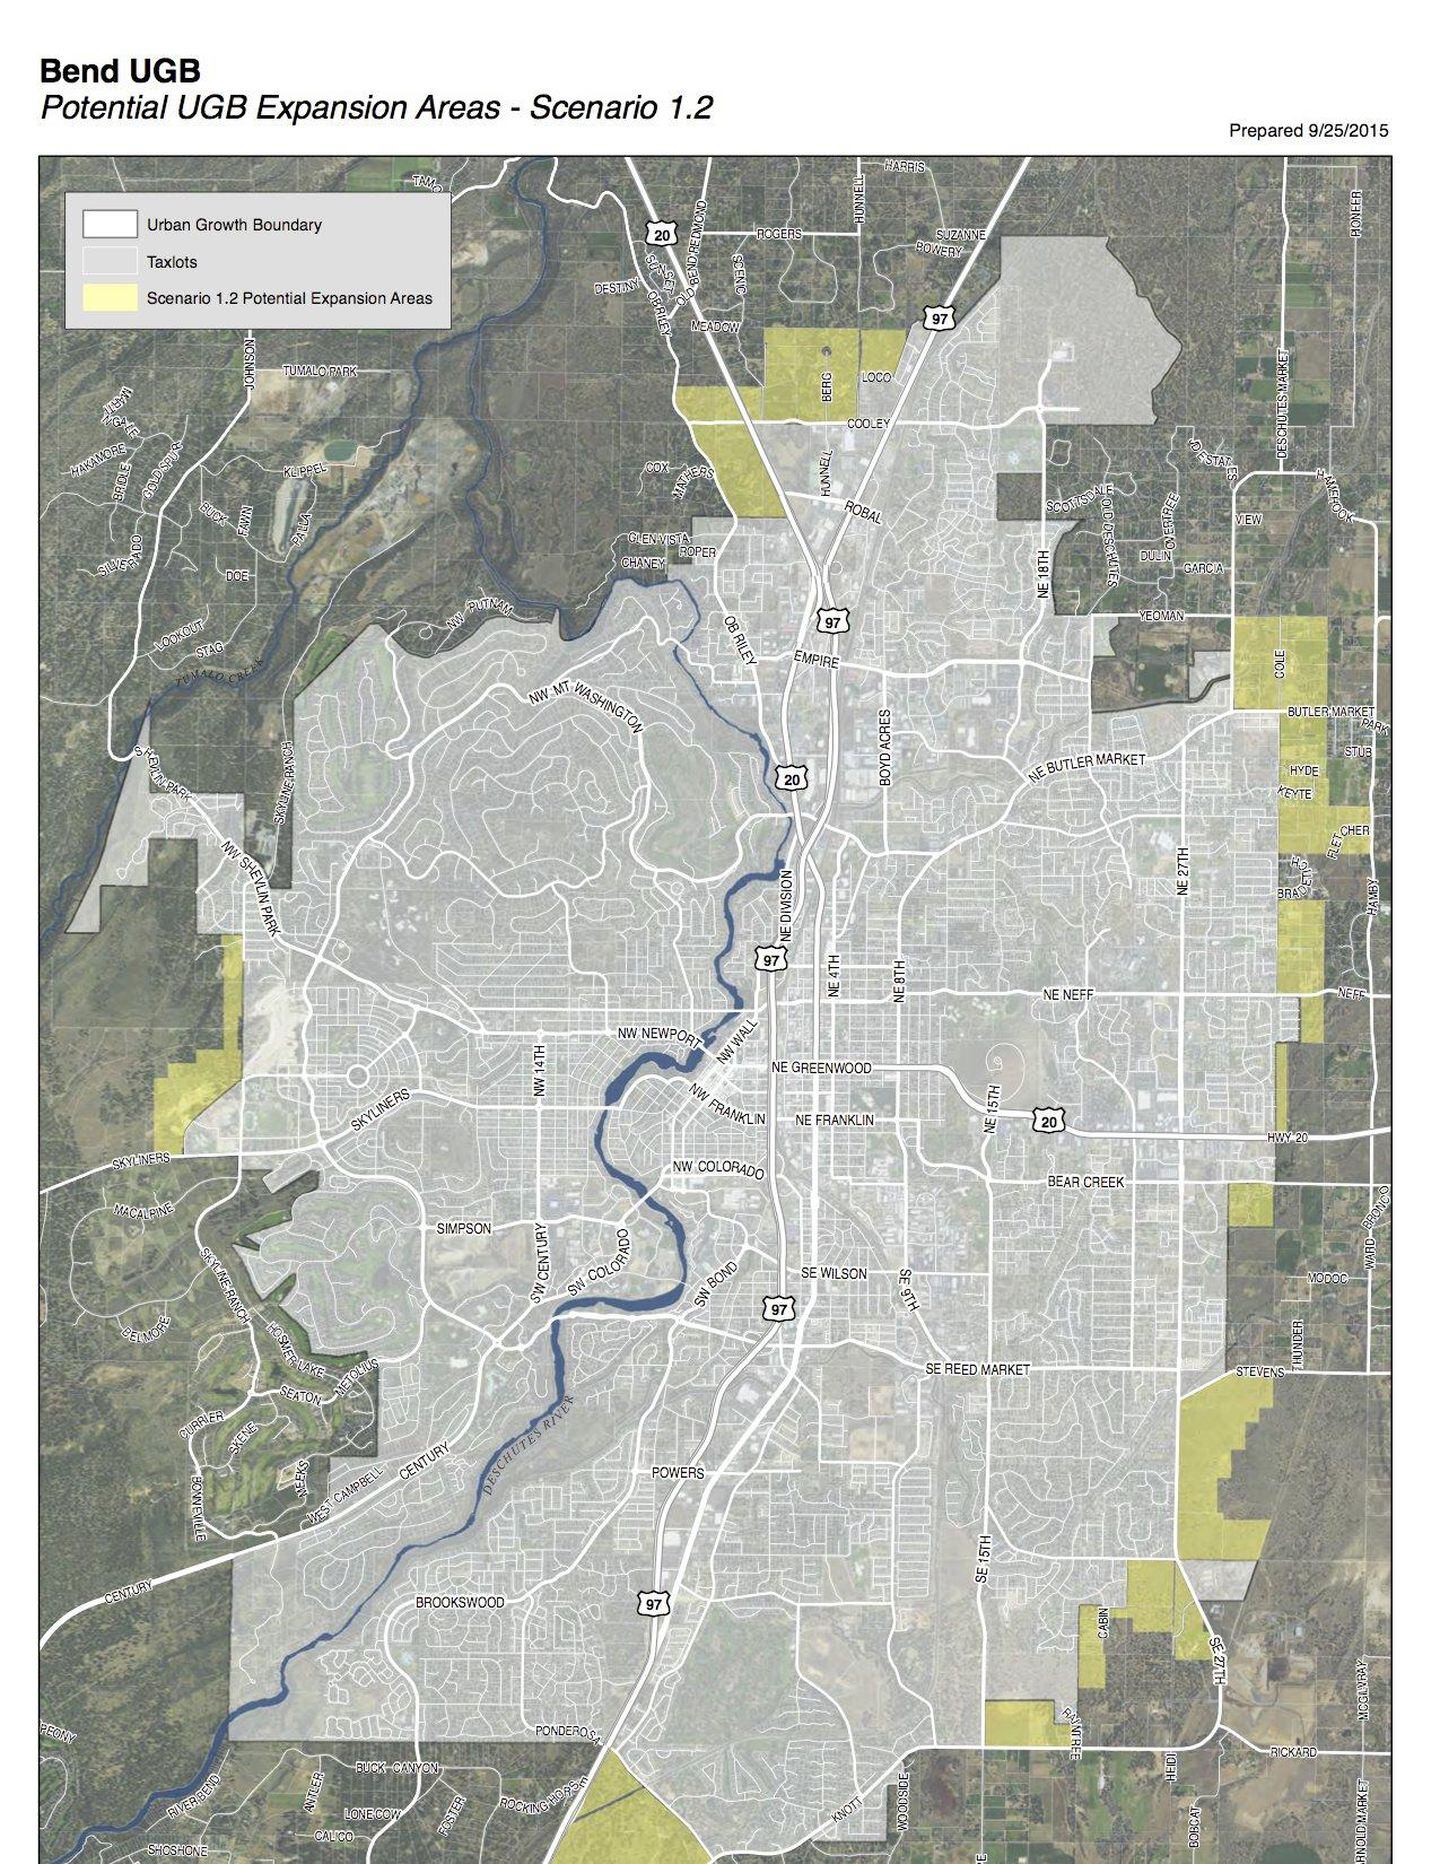 City could annex more land from the UGB for housing in southeast Bend, Local&State